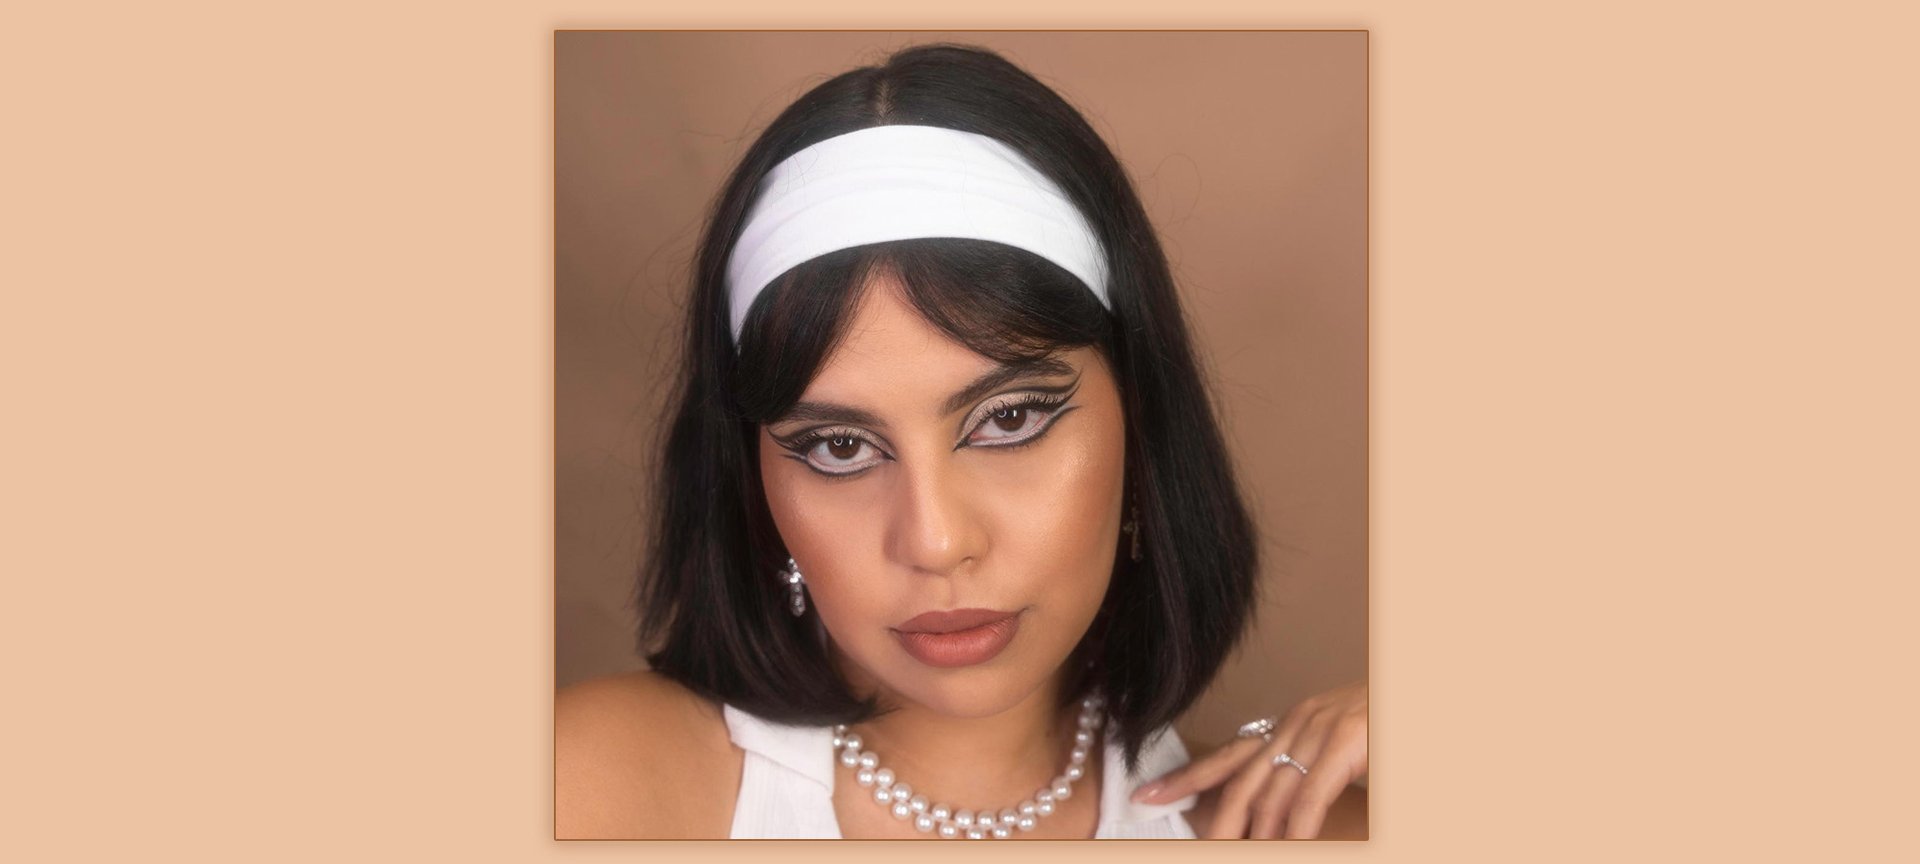 70's Makeup Inspiration  Independent Fashion, Beauty & Culture